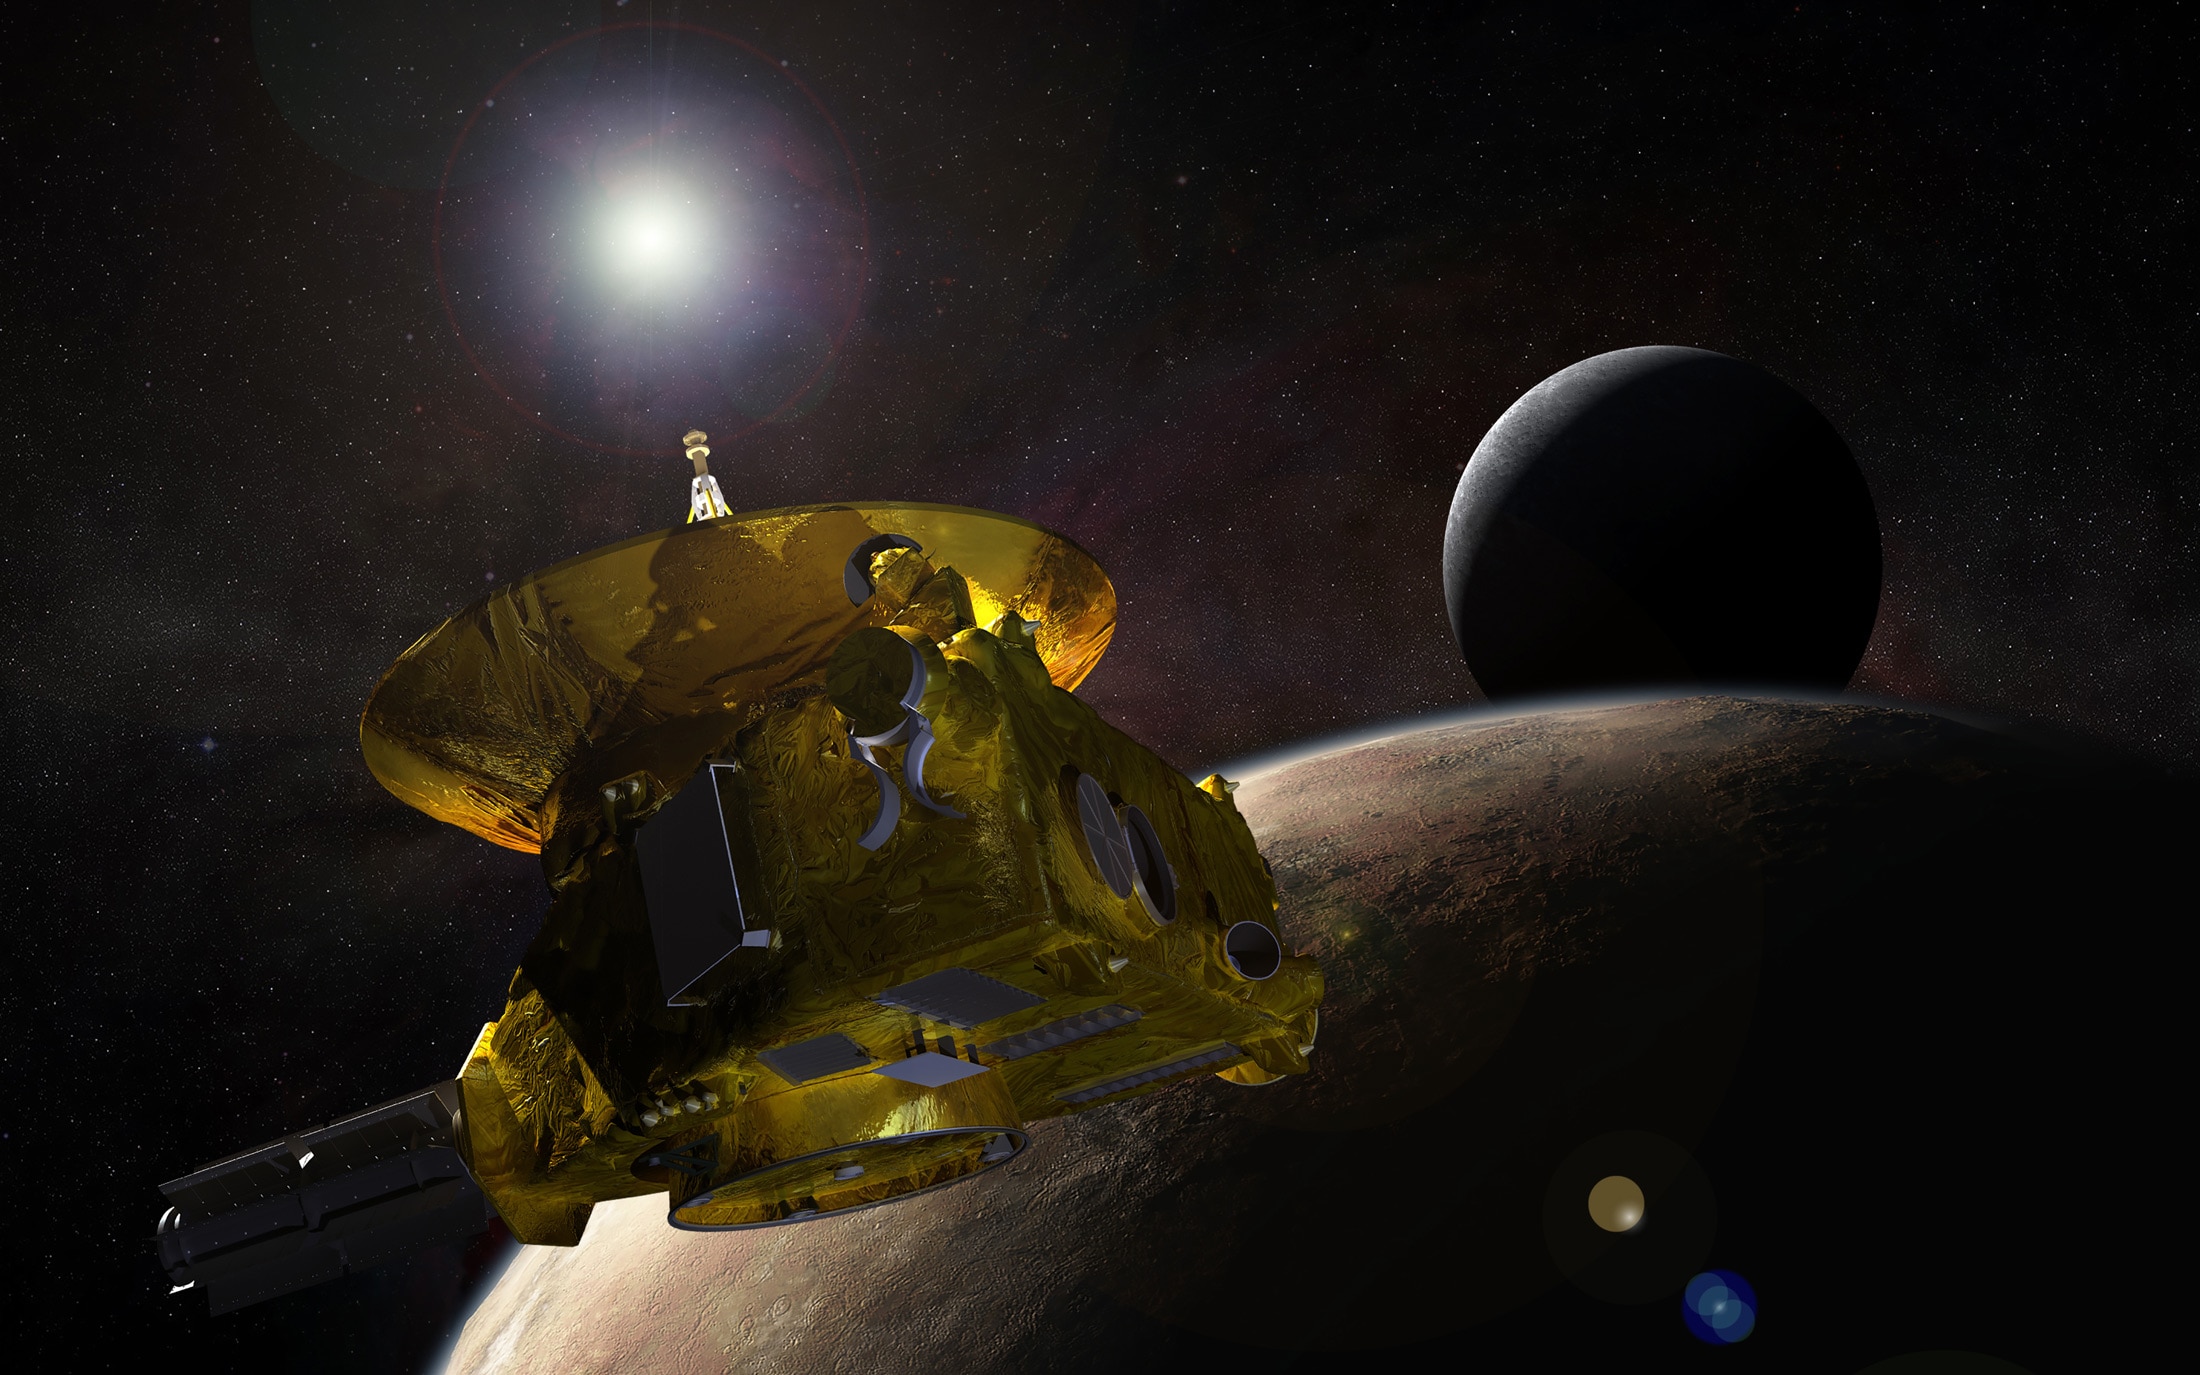 Artwork depicting the New Horizons spacecraft flyby of Pluto and Charon.